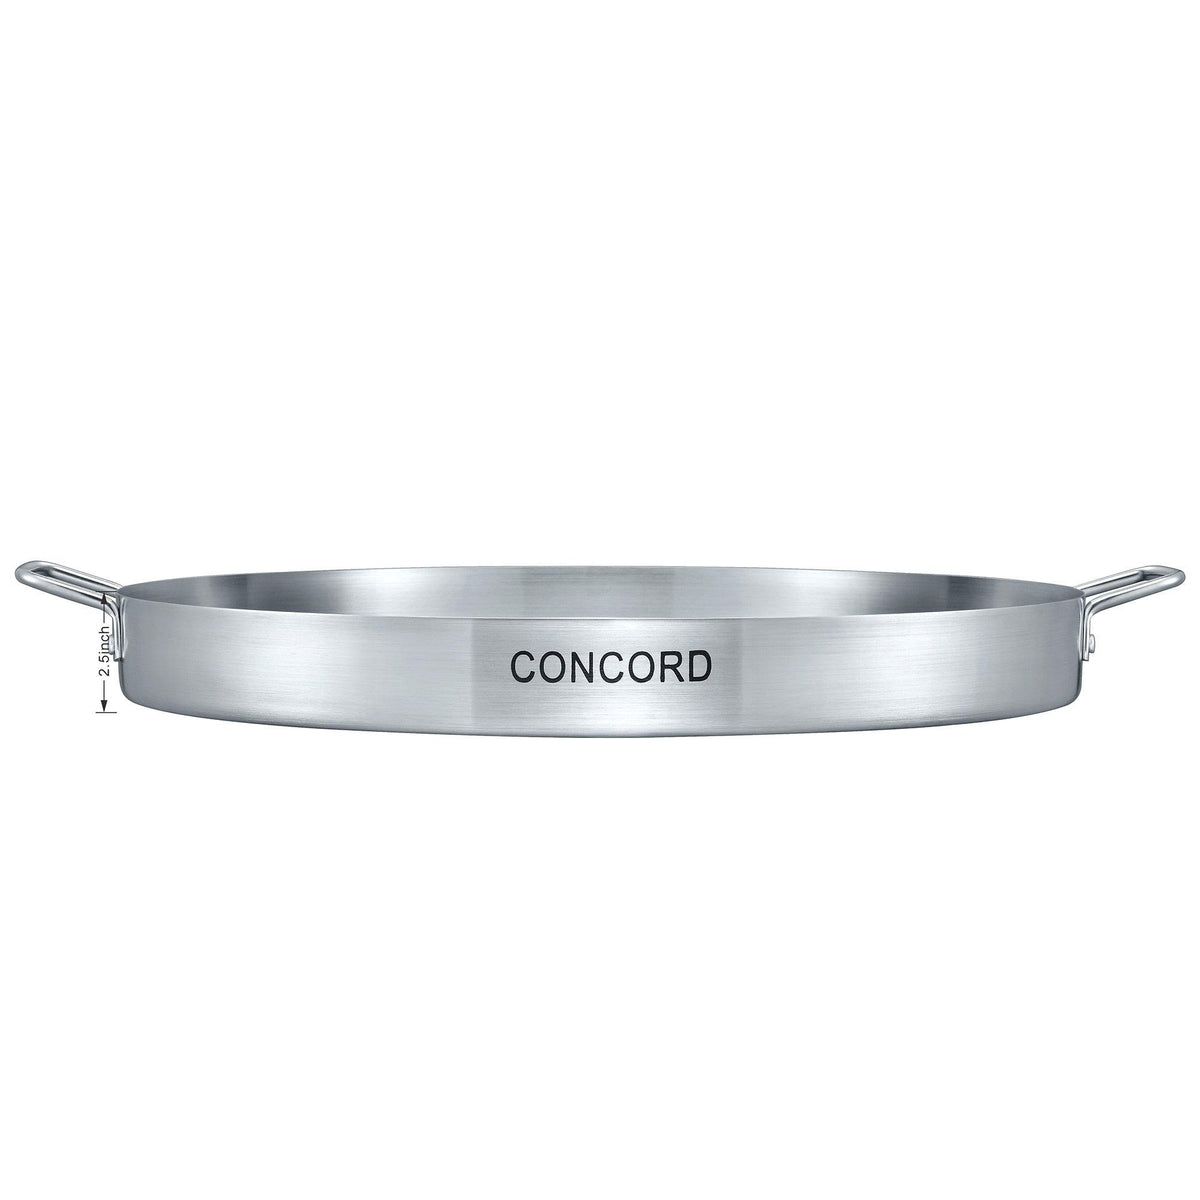 Comal Stainless Steel 21 Acero Inoxidable Convex Outdoors Stir